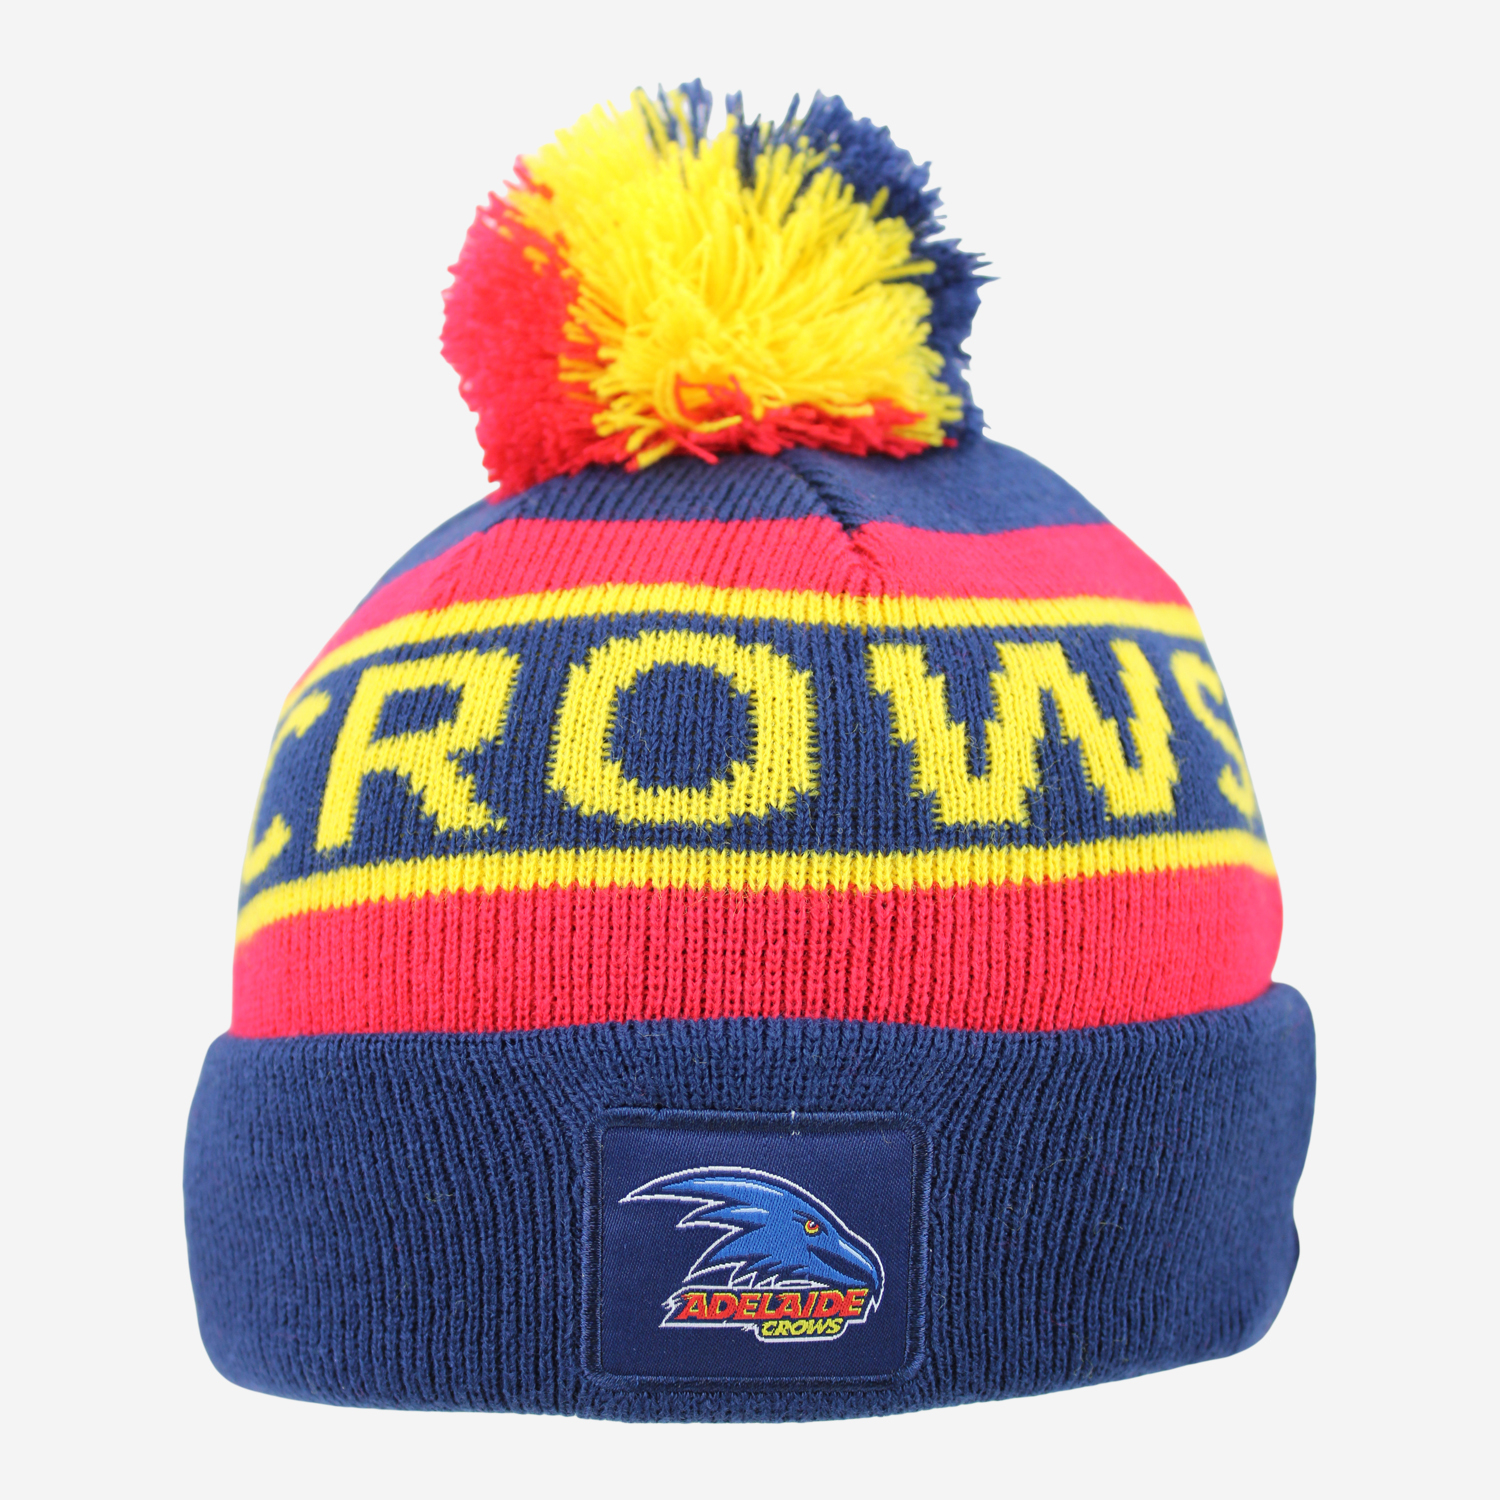 Adelaide Crows Youth Beanie